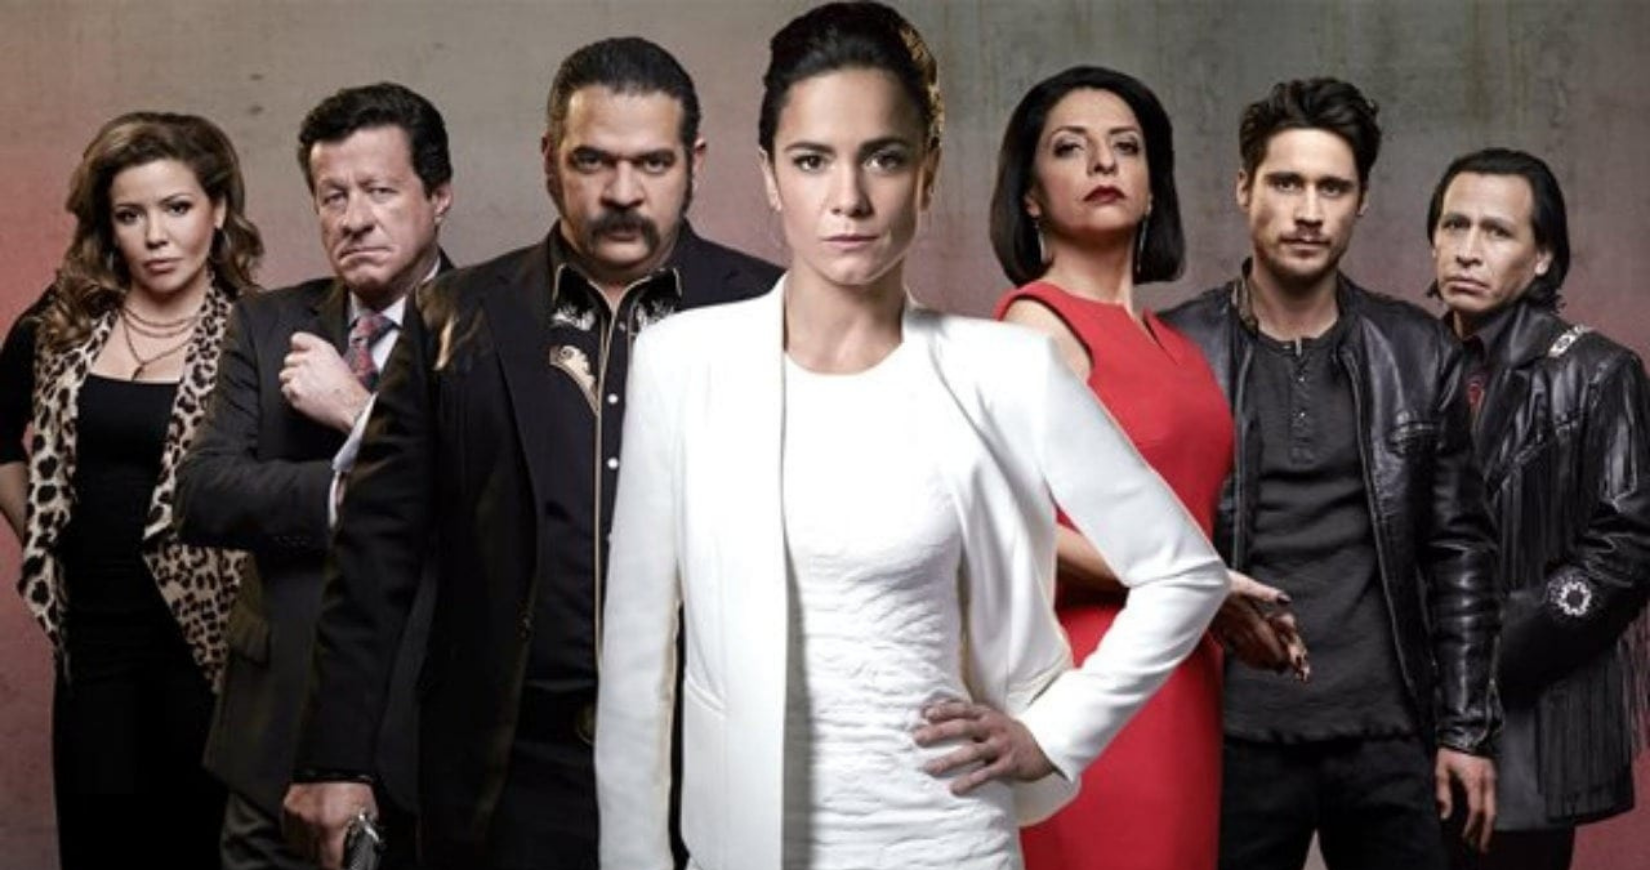 who is queen of the south based on